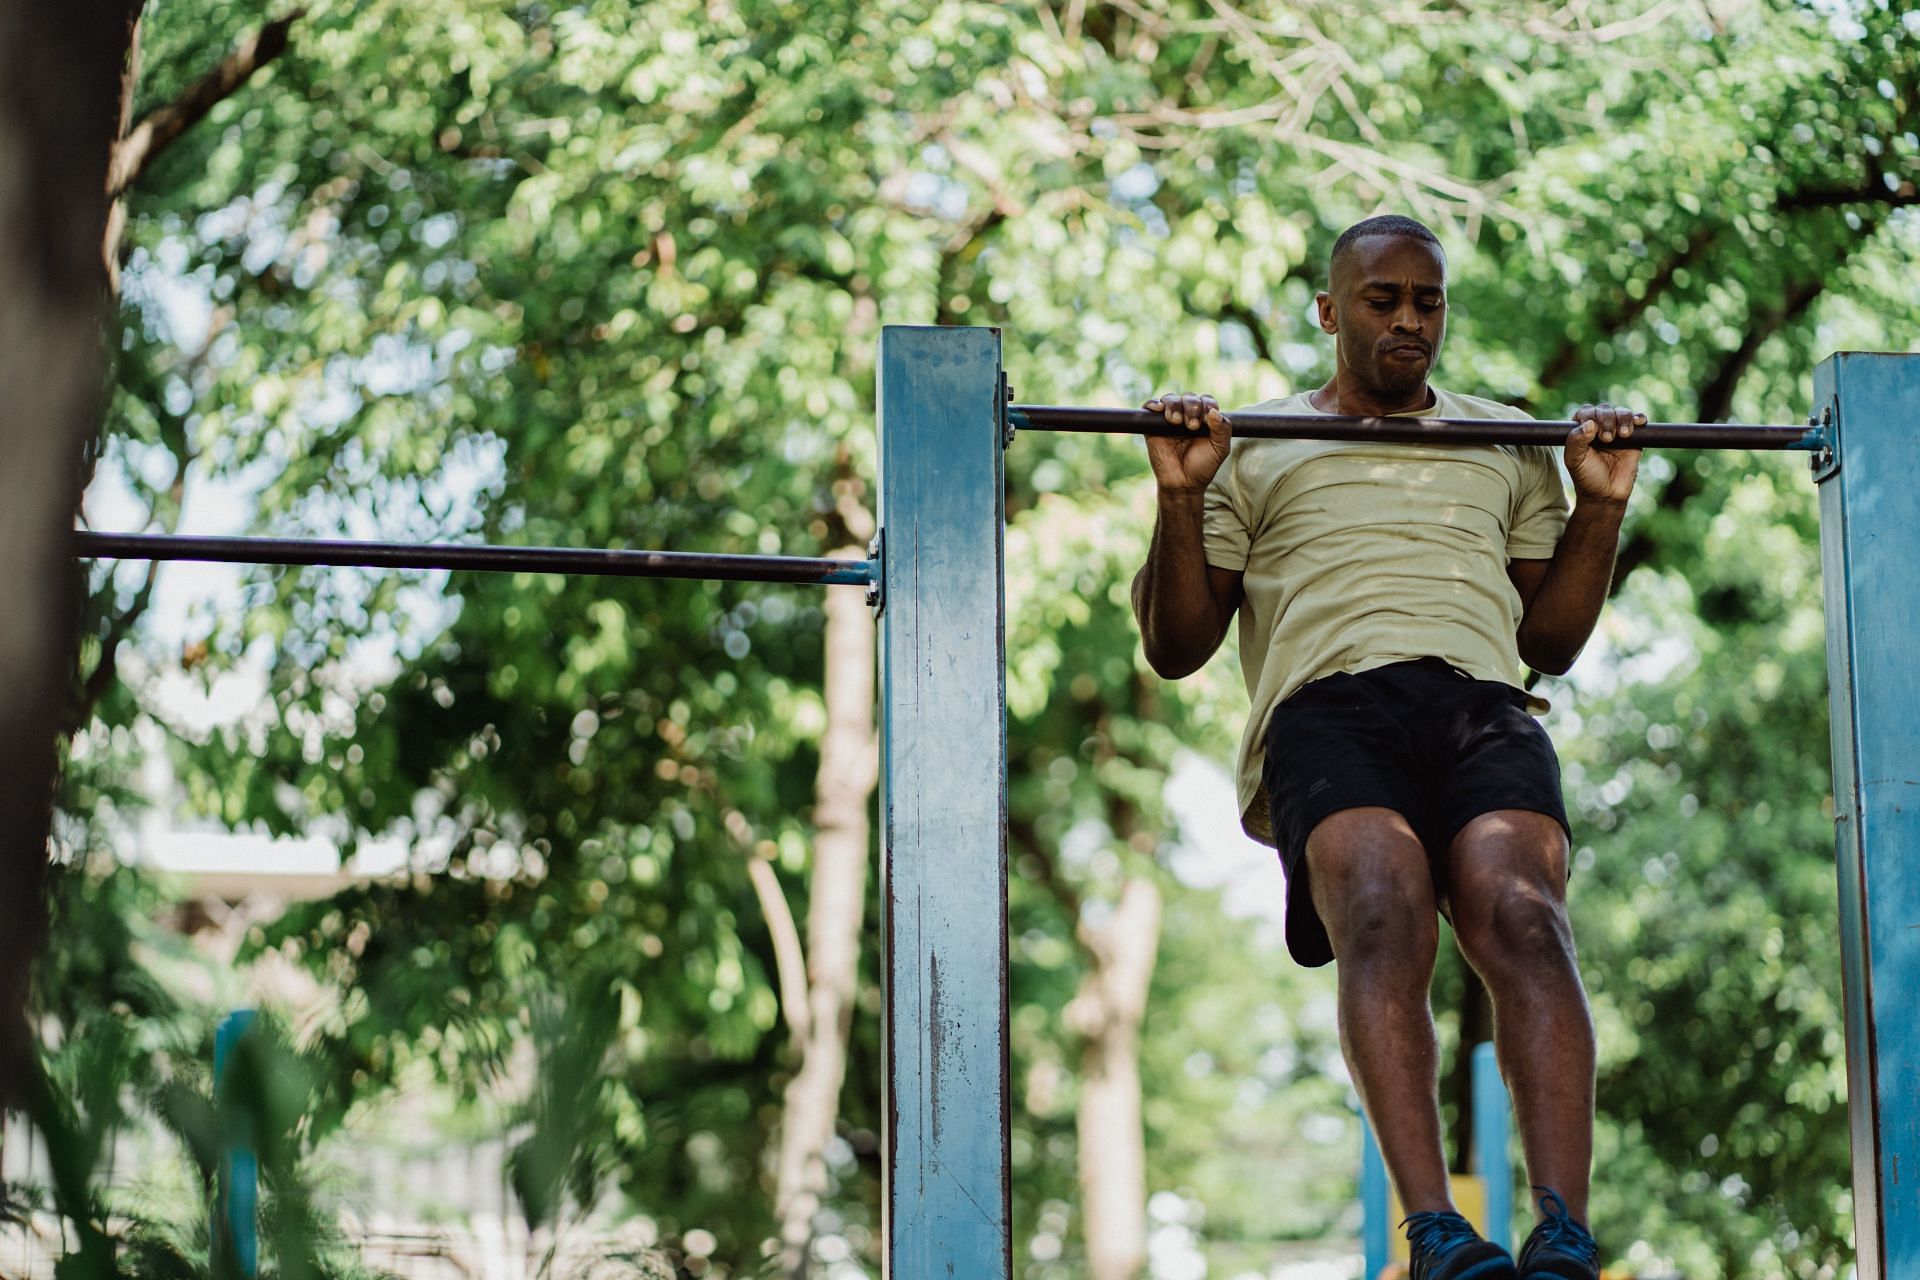 Best Outdoor Pull-up Bars For Building A Strong Upper Body (Image via Pexels)